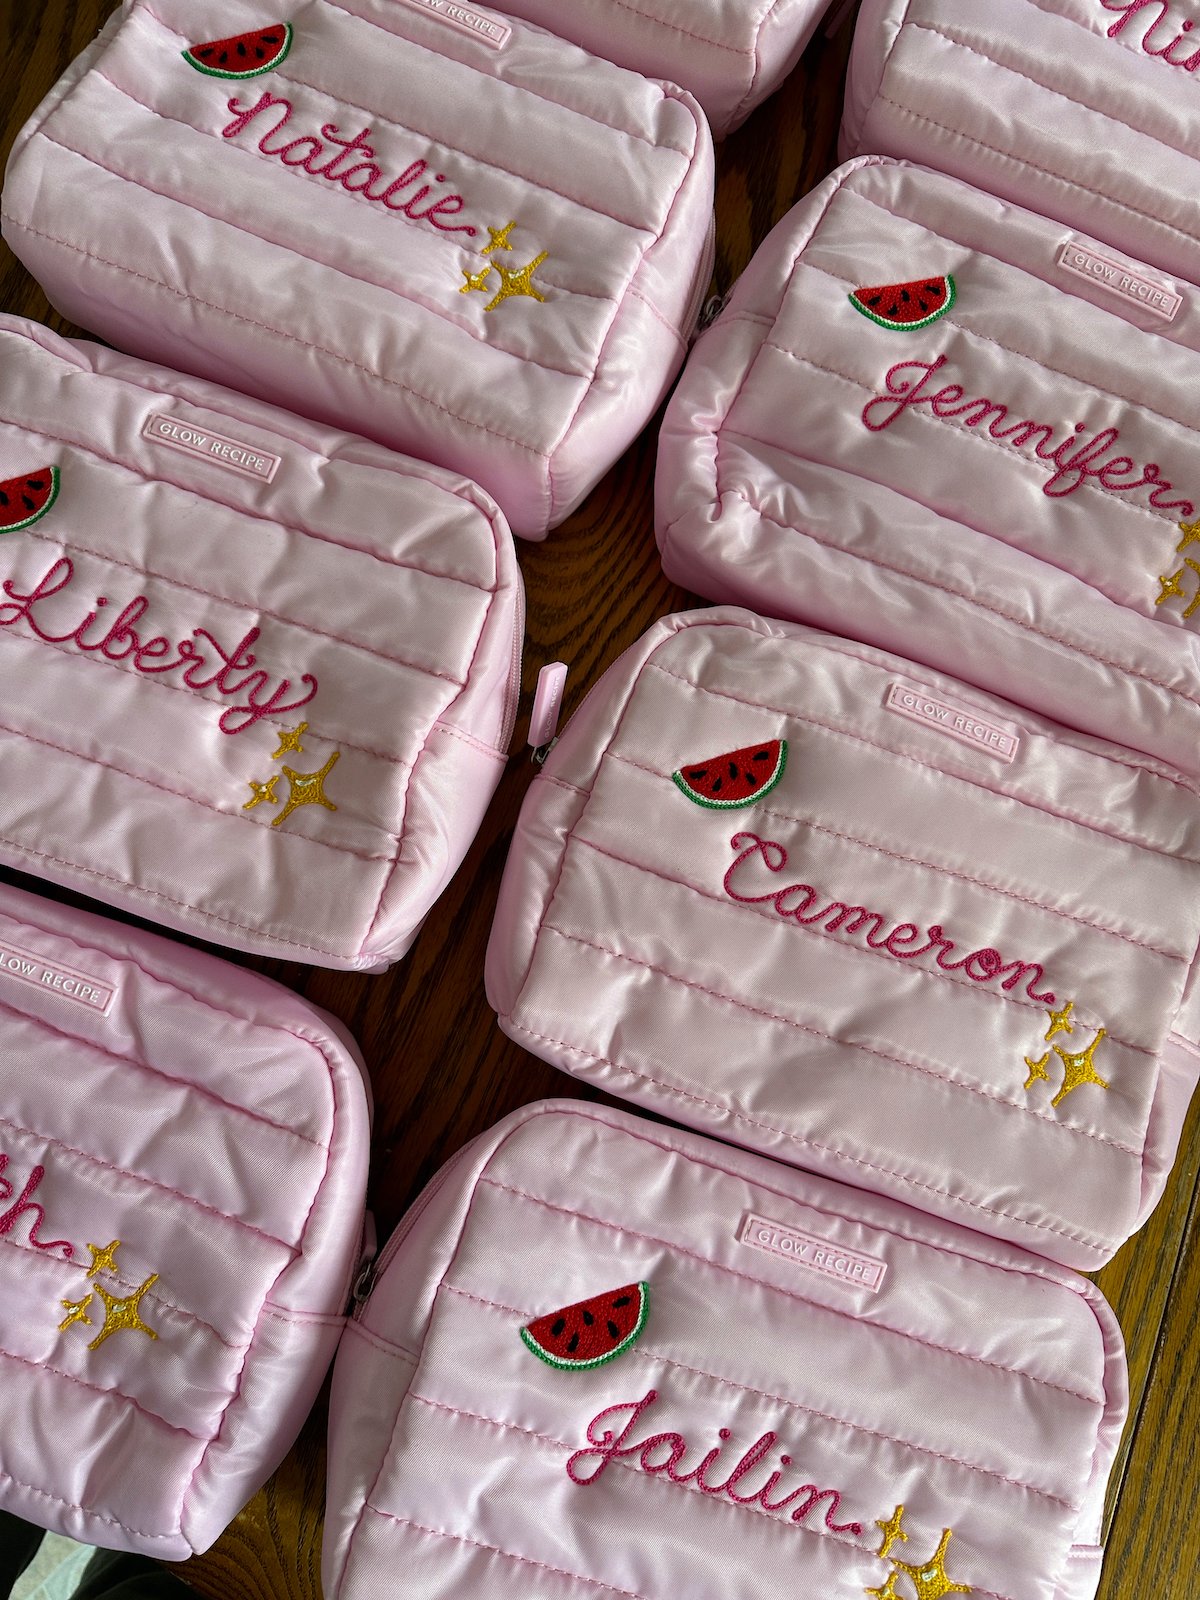 Glow Recipe chainstitch embroidered makeup pouches.JPG